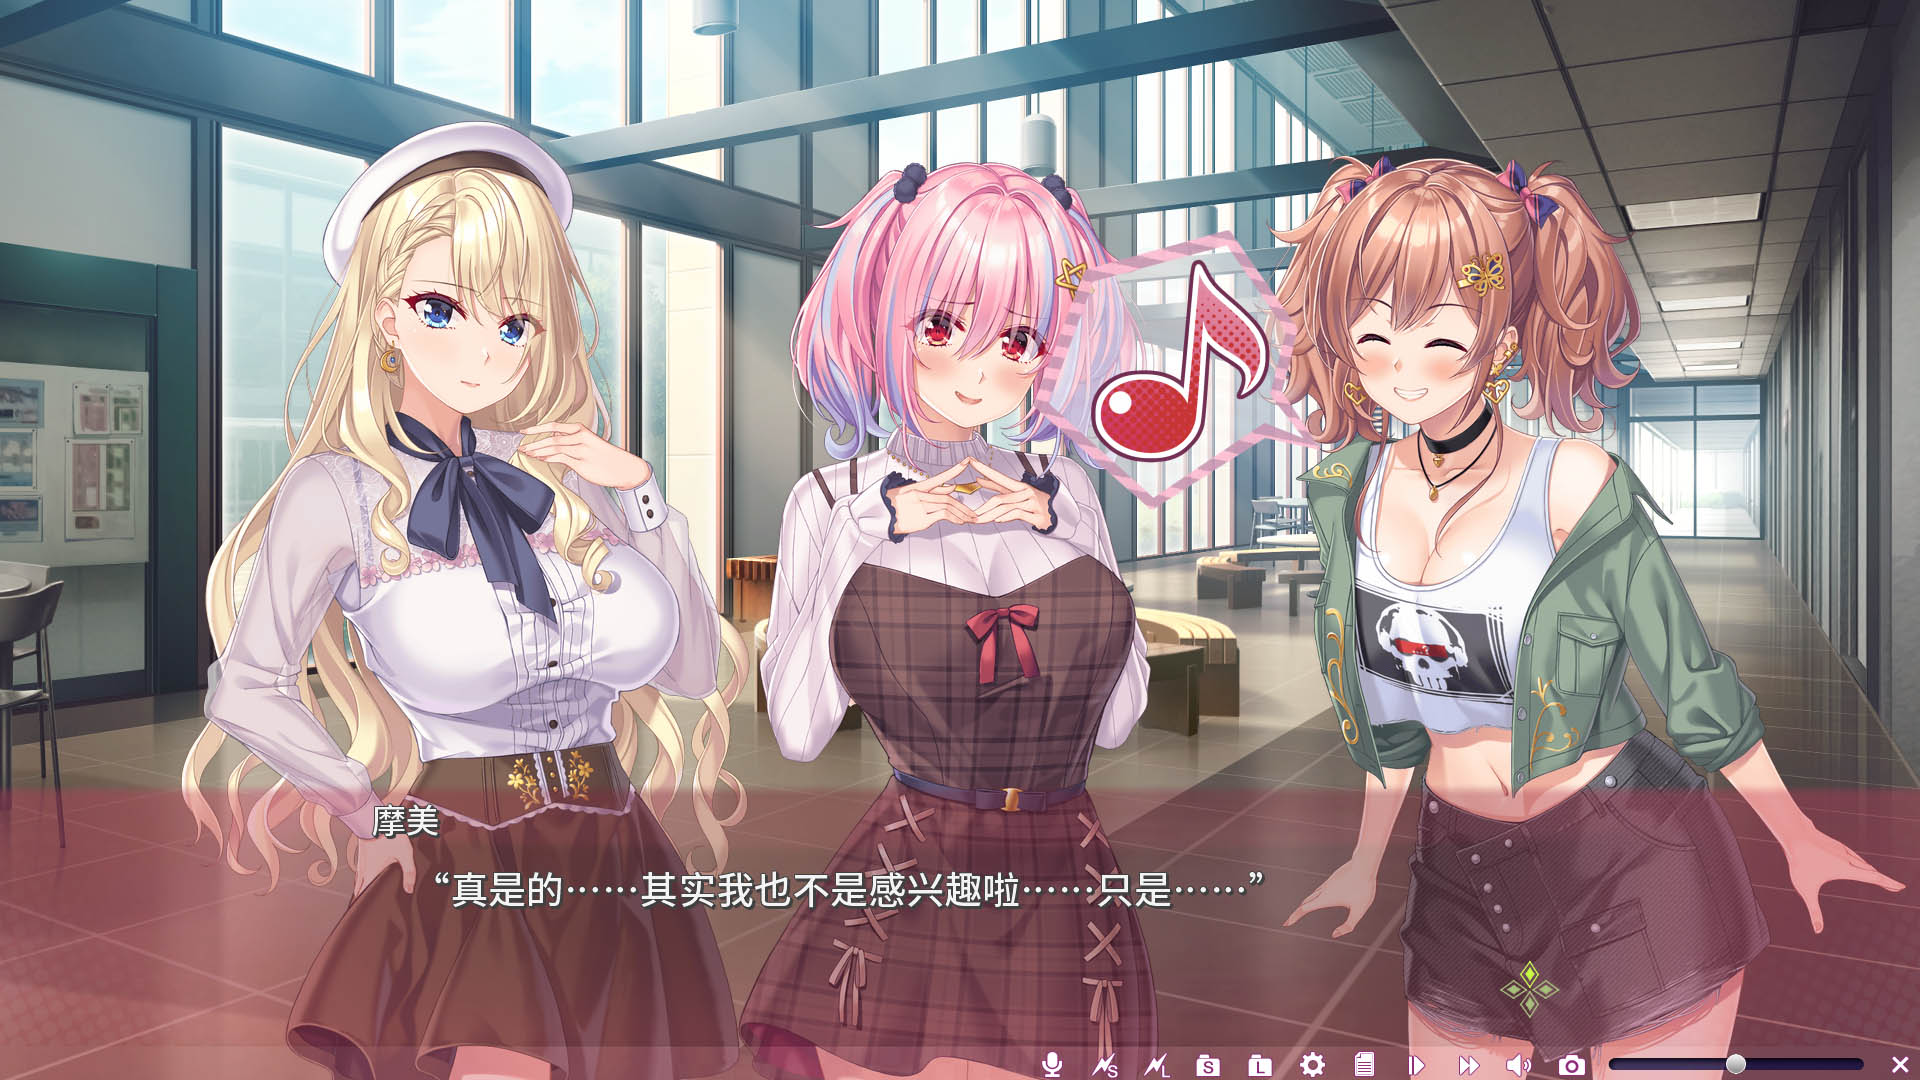 18+ DLC - Succubus Sessions: Mami Mamiya’s Sweet Slice of Hell (Simplified Chinese) Patch for Steam - Visual Novel - 4 - Select